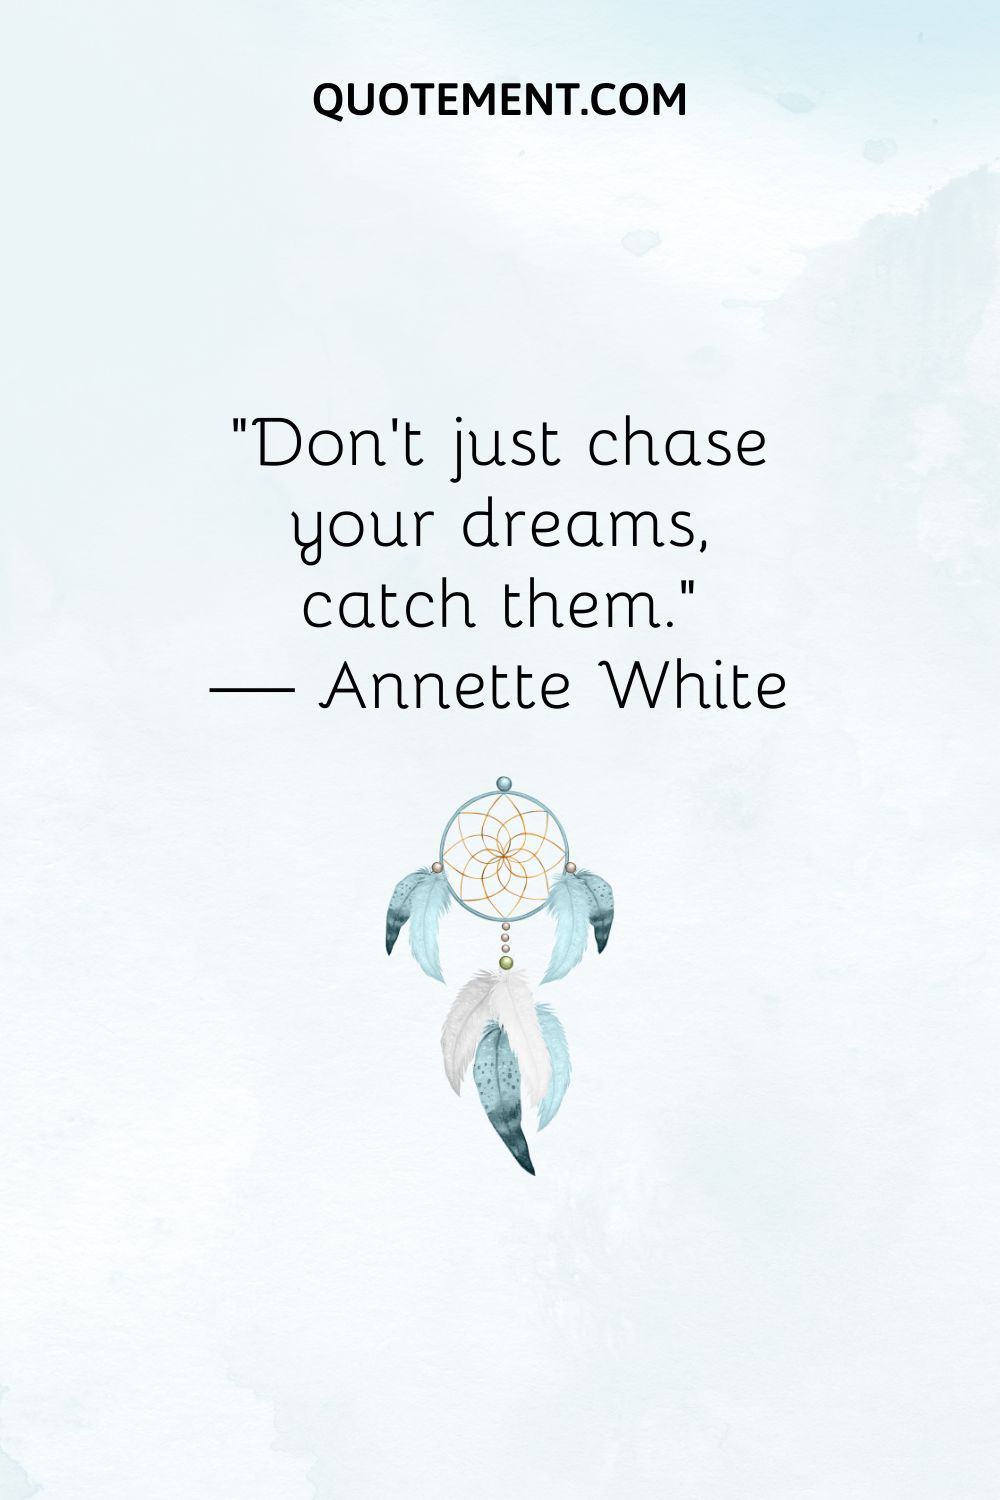 “Don’t just chase your dreams, catch them.” — Annette White